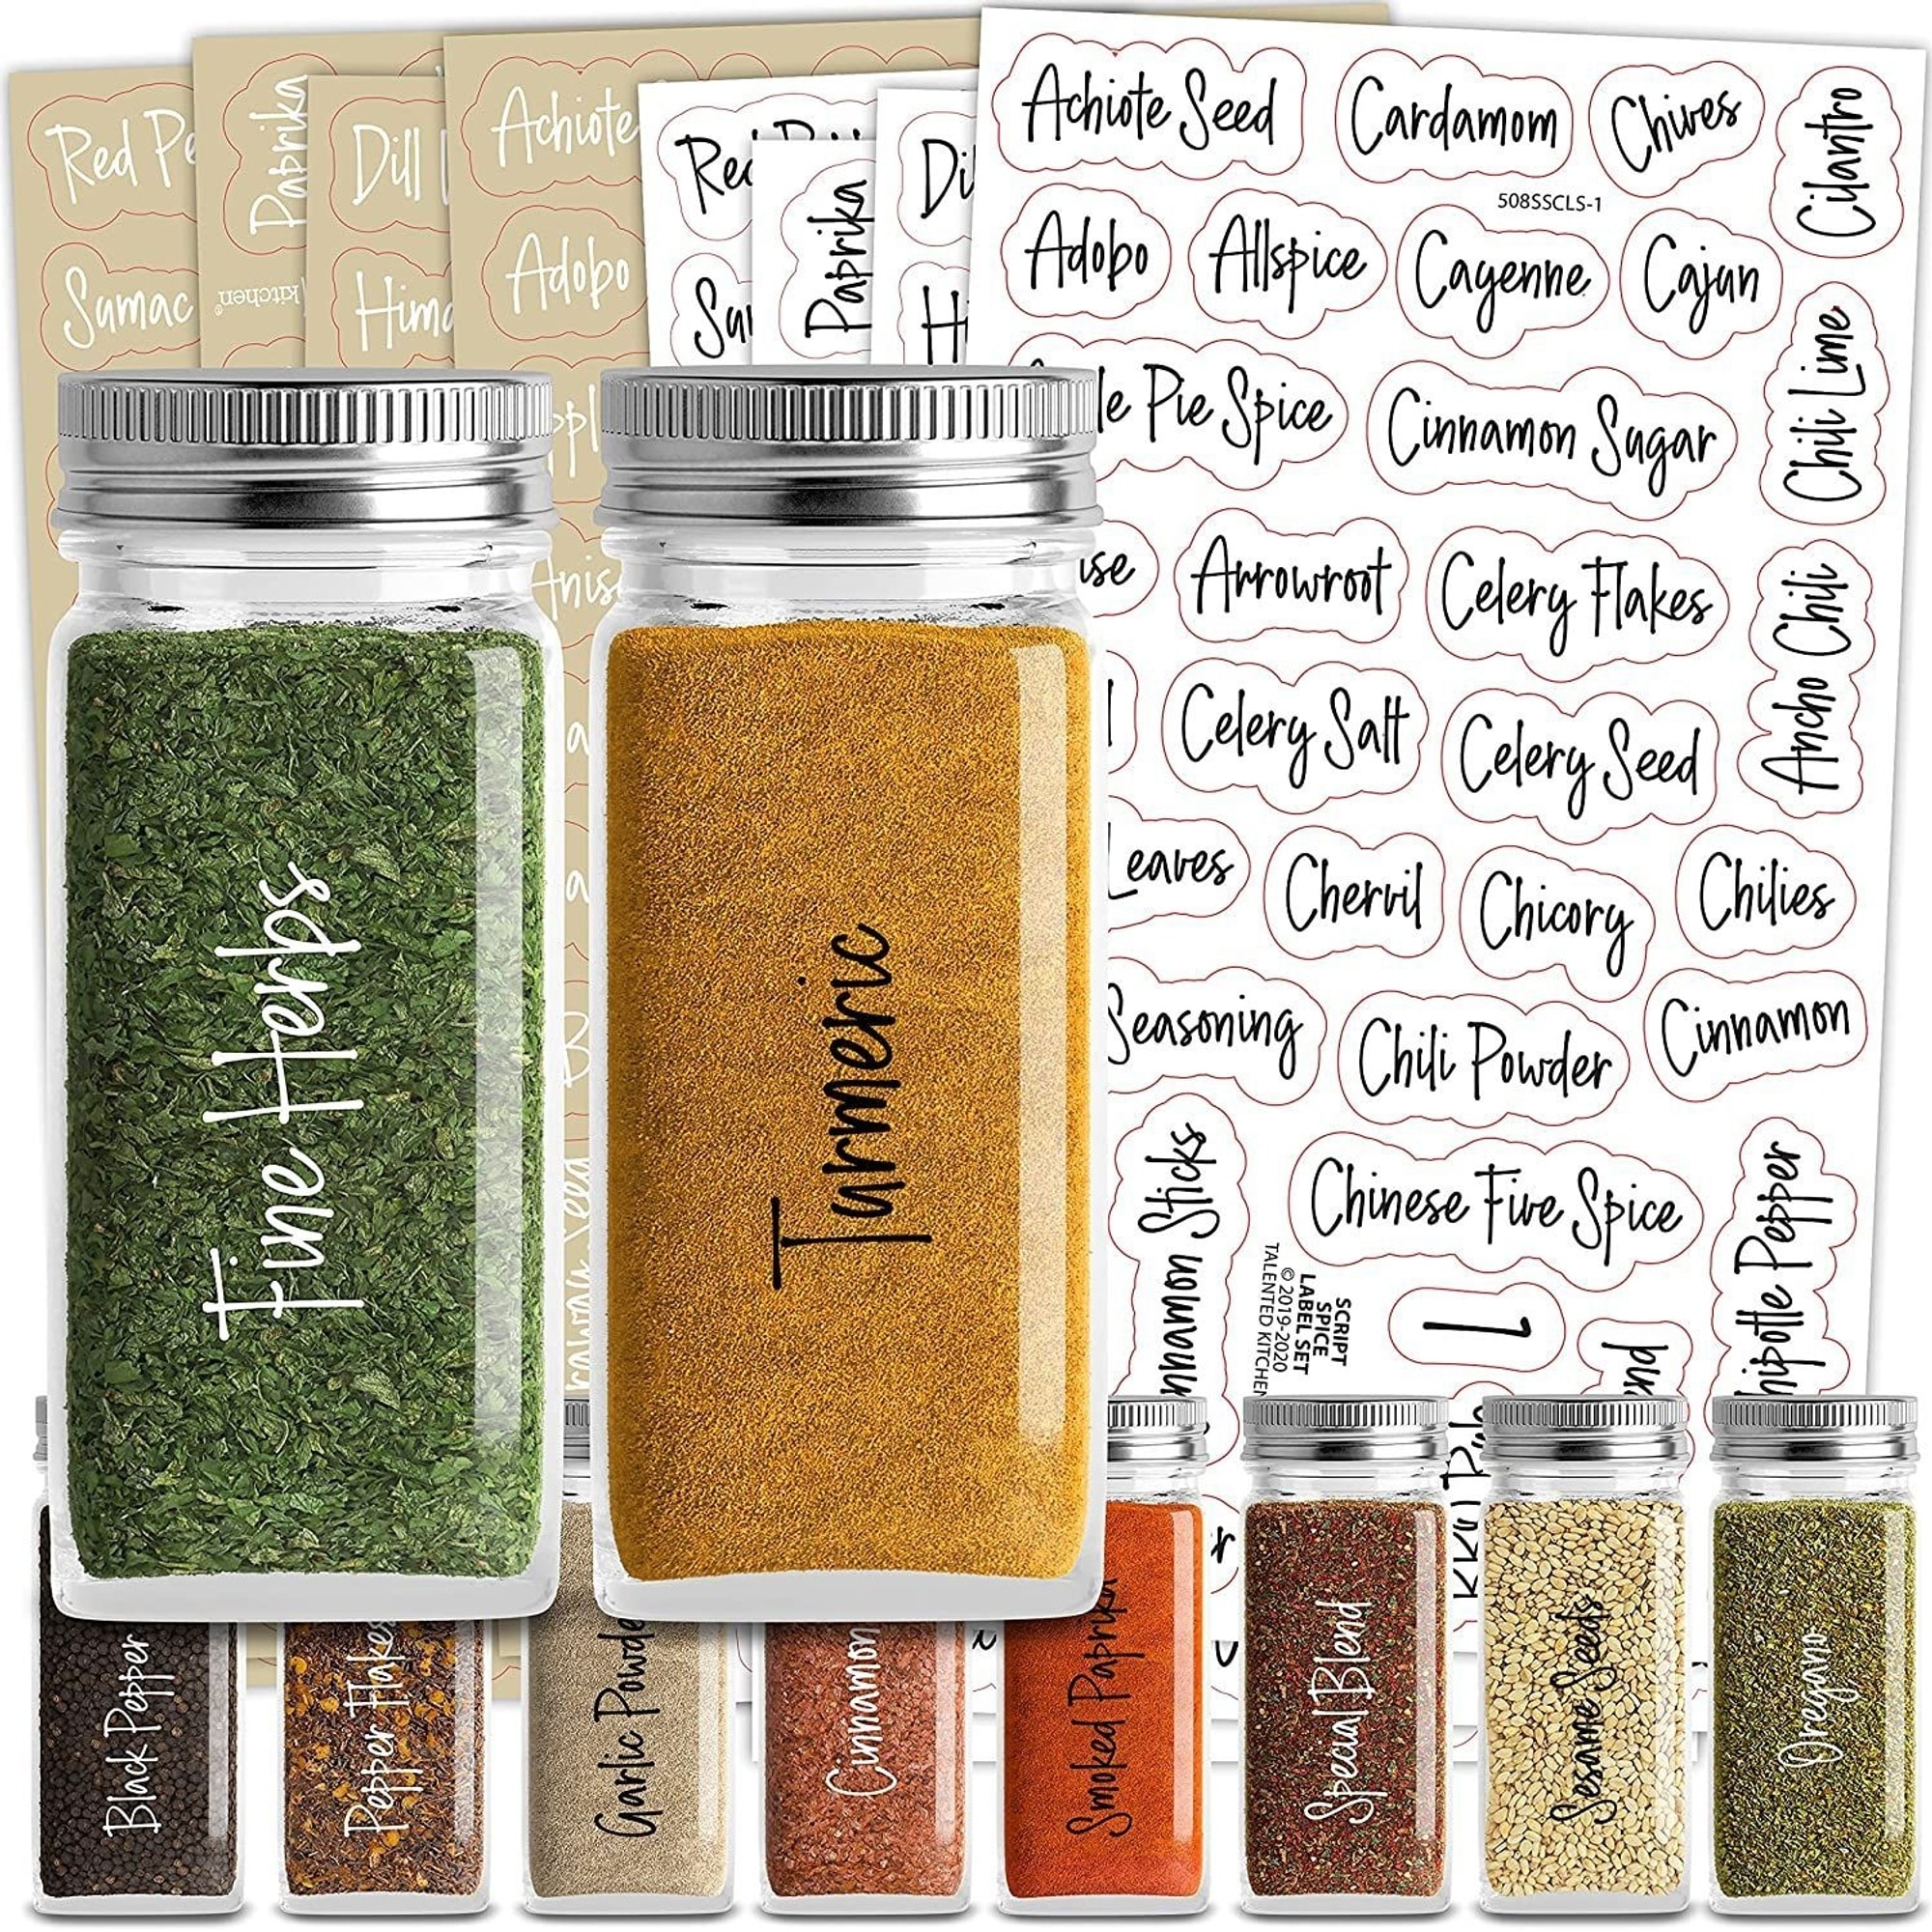 https://ak1.ostkcdn.com/images/products/is/images/direct/c76613f406900bc9e5eaa348c37e64f5f54c1e50/Talented-Kitchen-272-Spice-Labels-Stickers%2C-Clear-Spice-Jar-Labels-Preprinted.jpg